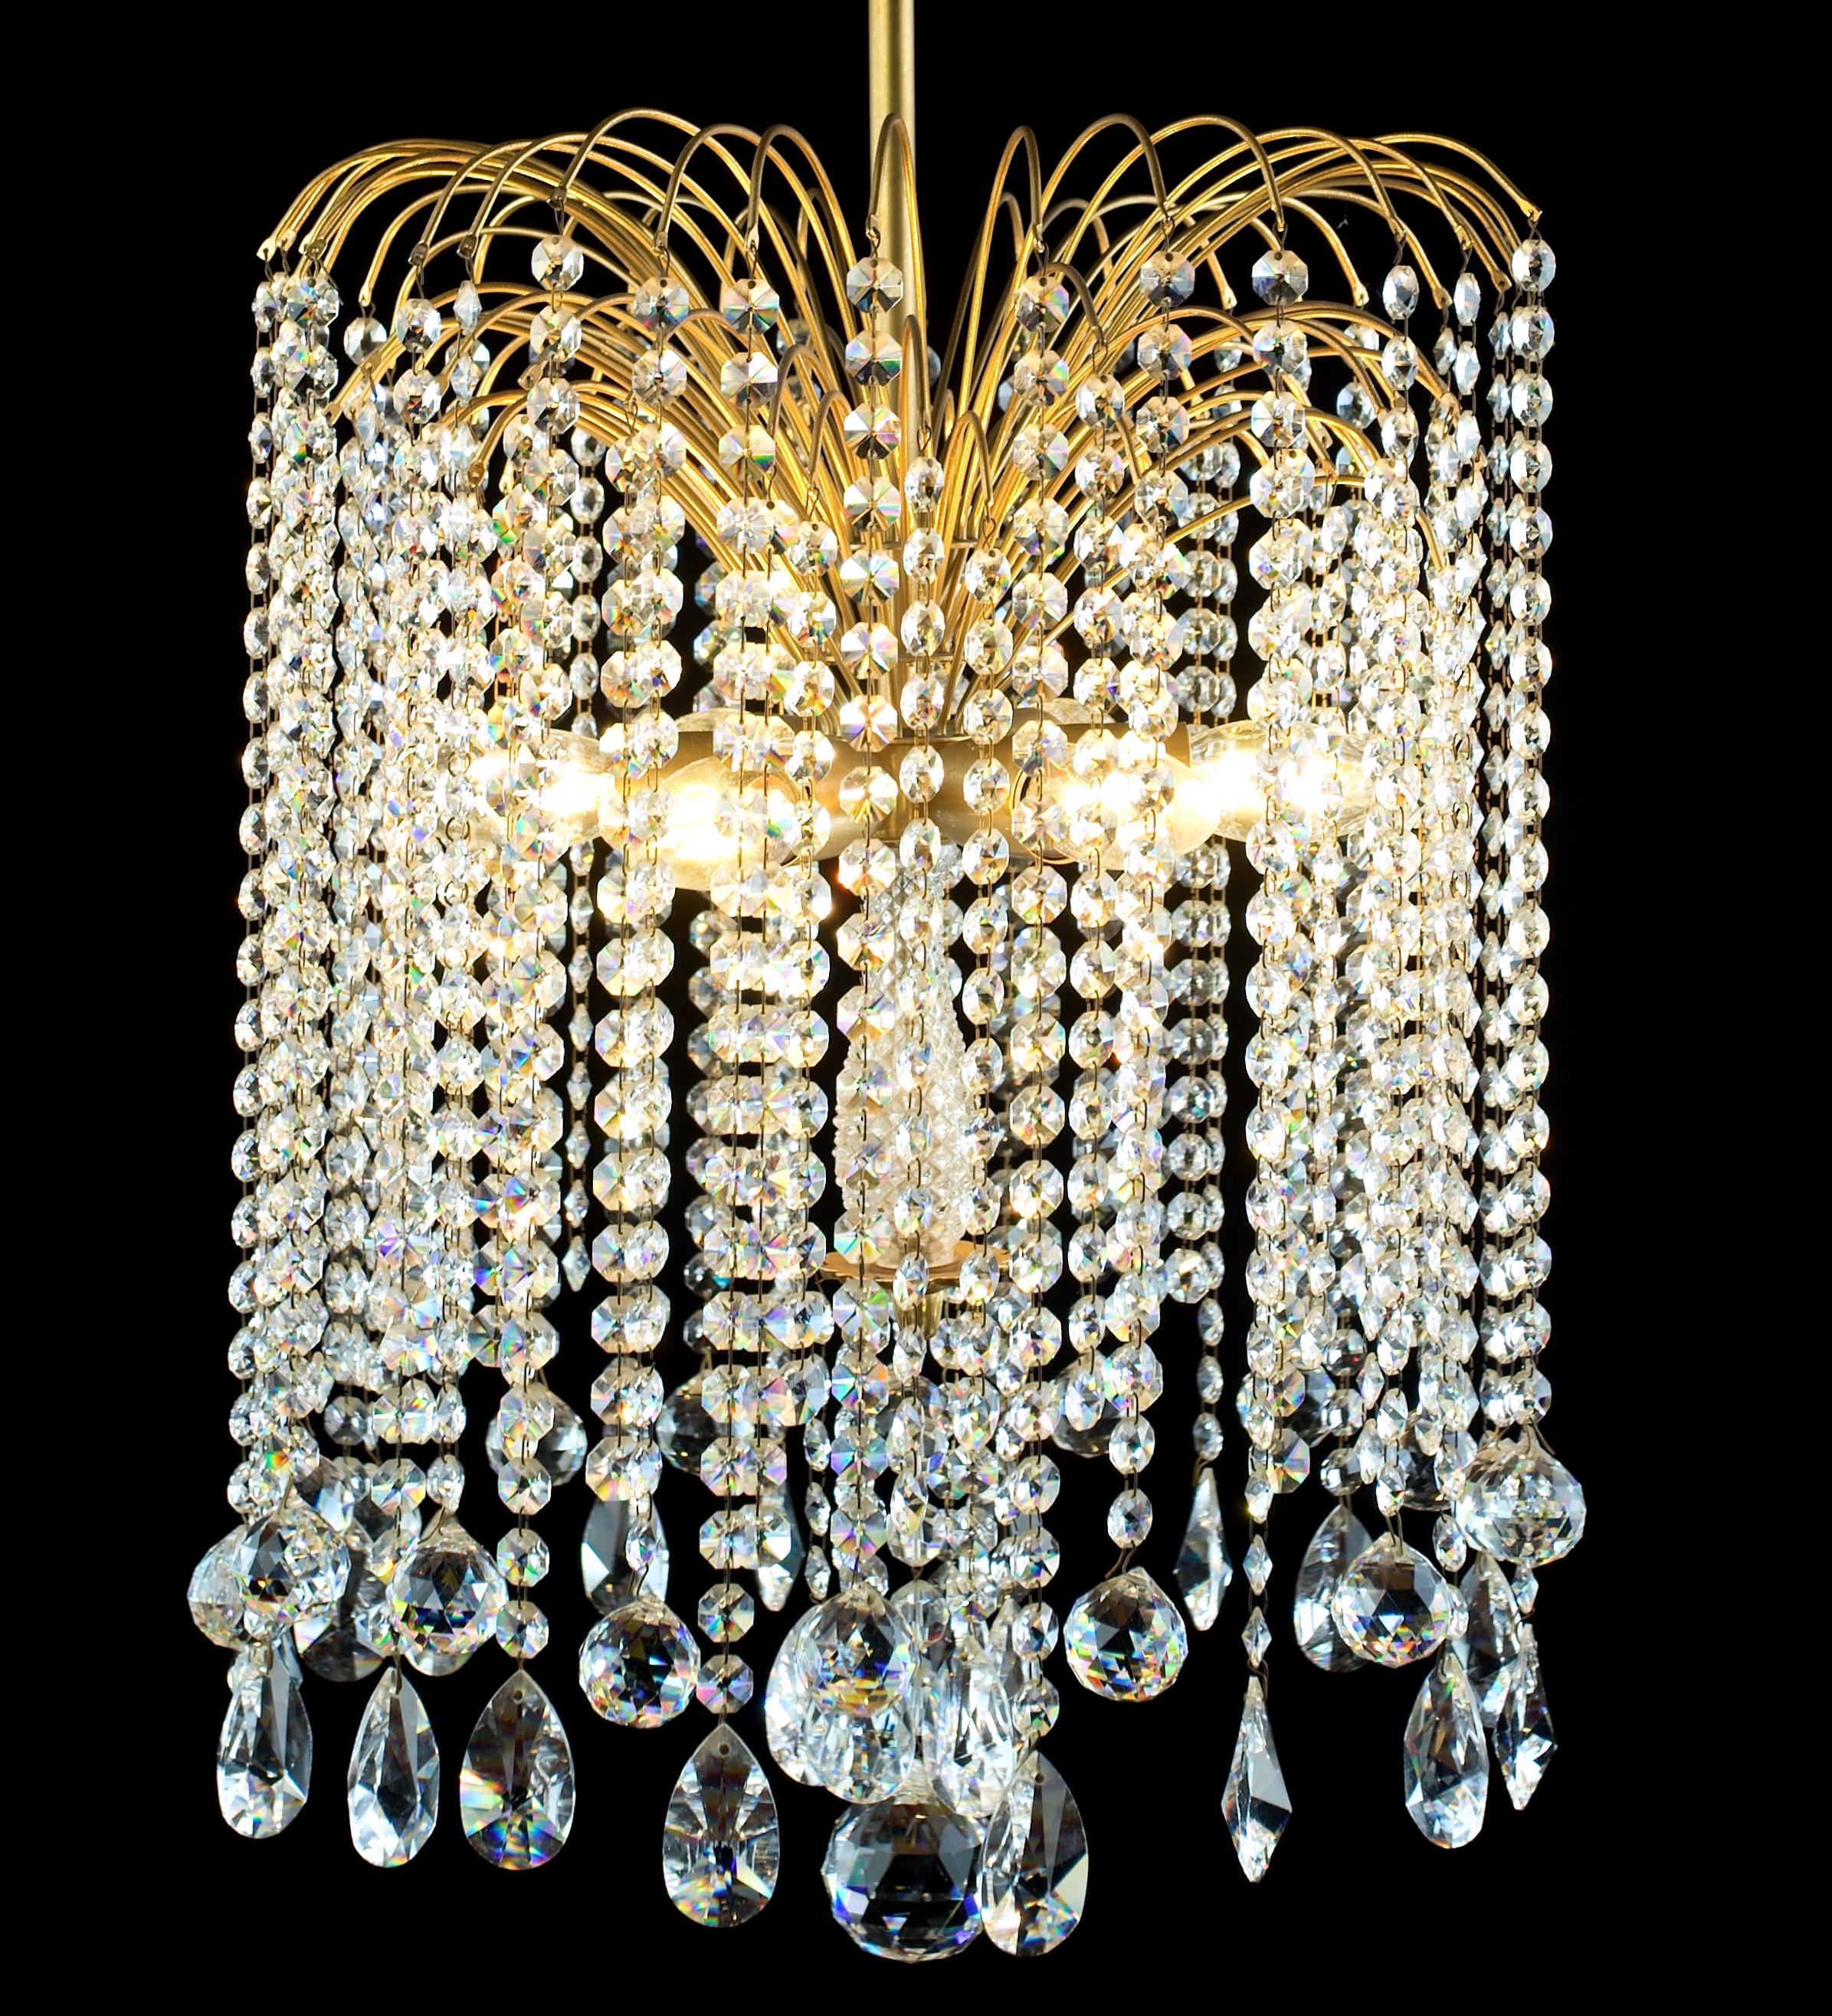 A brass chandelier with a rich cascade of lead crystal crystal pendants. The oats are hand-ground and polished. This model is quite rare and will light up the interior day and night. The chandelier is for six classic candle bulbs with an E14 socket